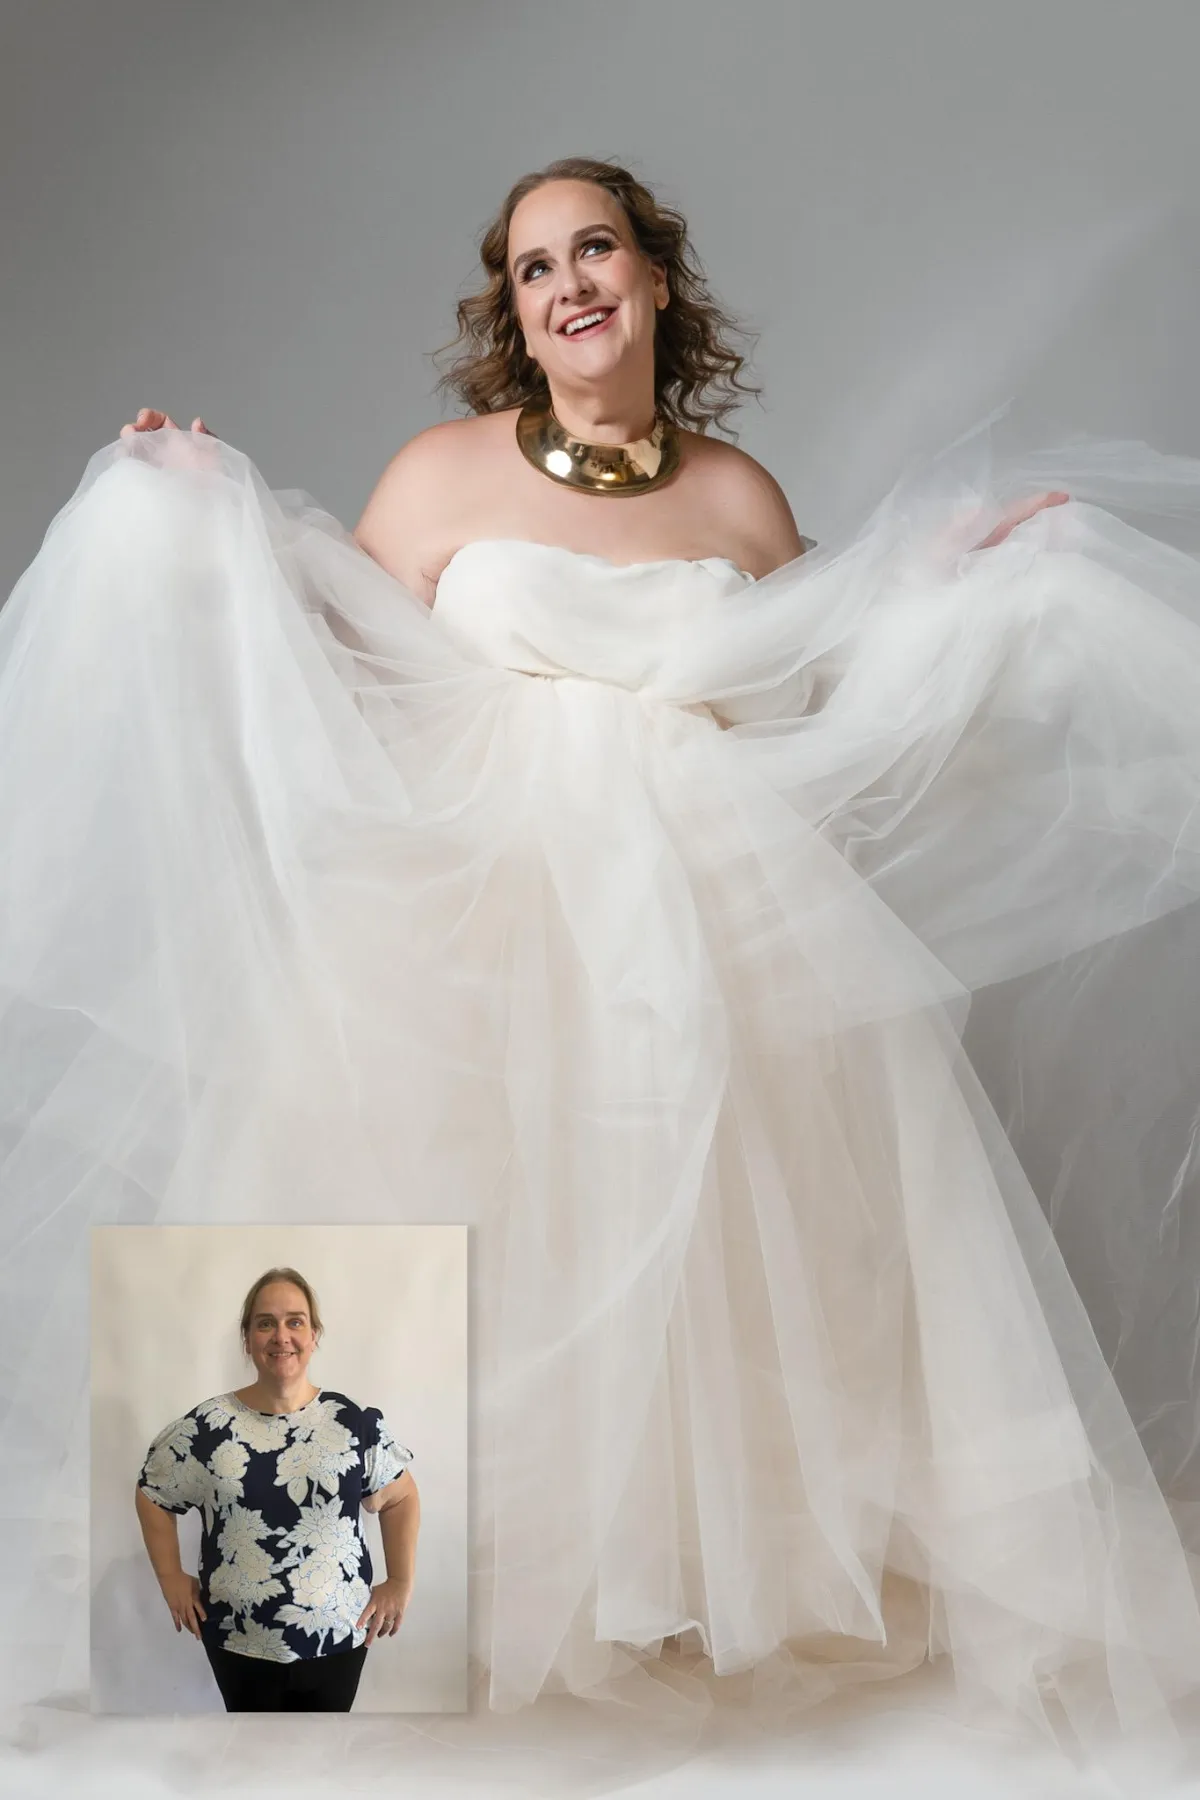 Jenn Hagar Before and After by Tucson Photographer Jessica Korff